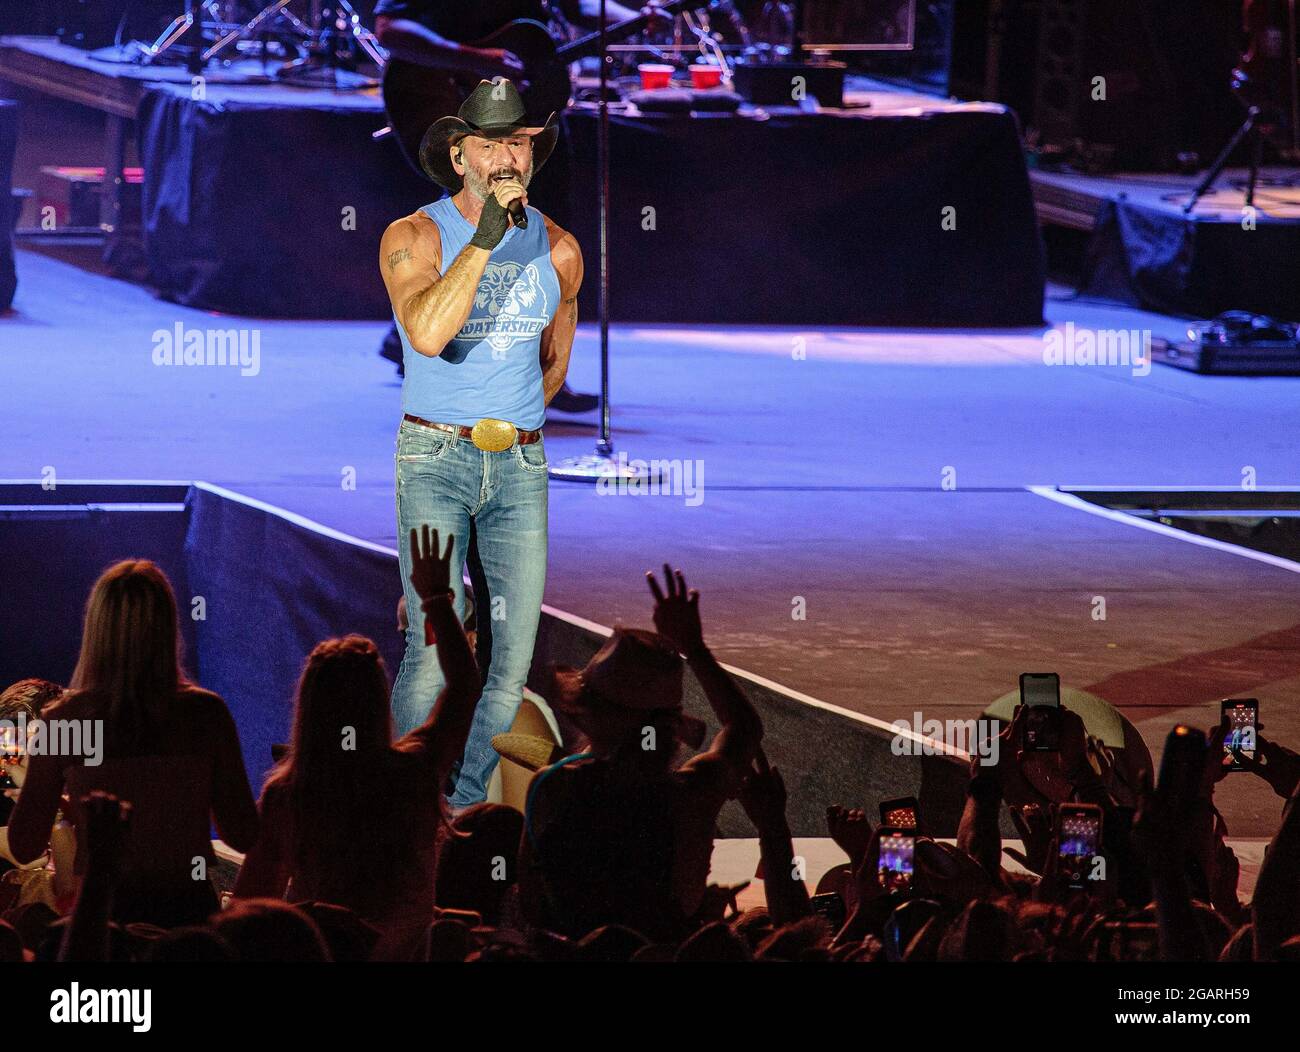 George, USA. 30th July, 2021. SInger Tim McGraw headlines night one of the Watershed Music Festival at The Gorge Amphitheater on July 30, 2021 in George, Washington. (Photo by Xander Deccio/ImageSpace) Credit: Imagespace/Alamy Live News Stock Photo